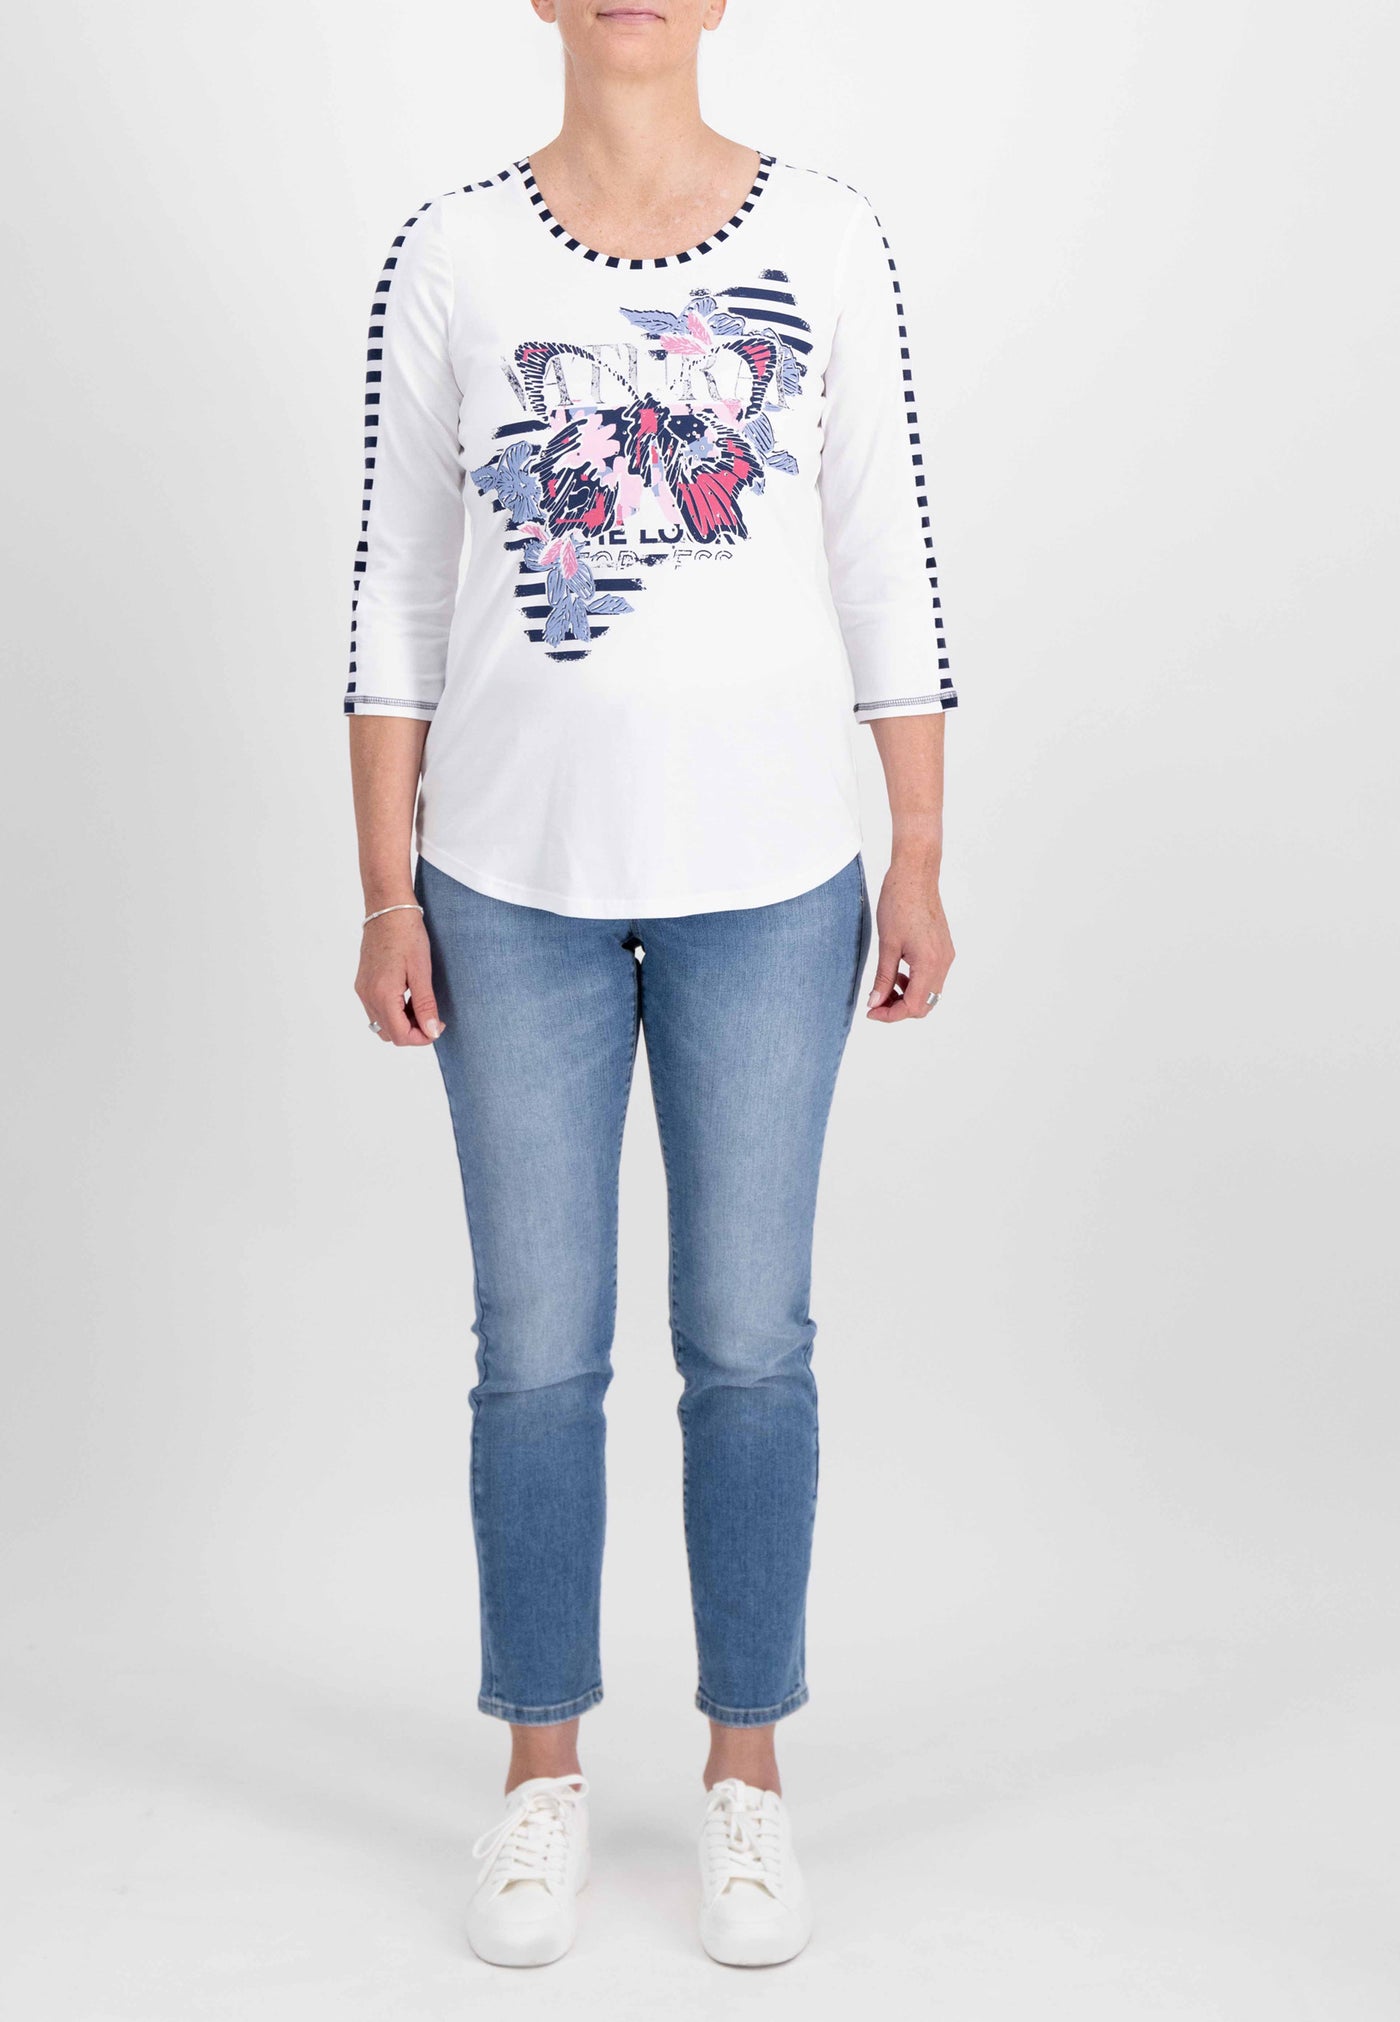 Pink, Navy & White Graphic Print Top with Stripe Details and 3/4 Sleeve